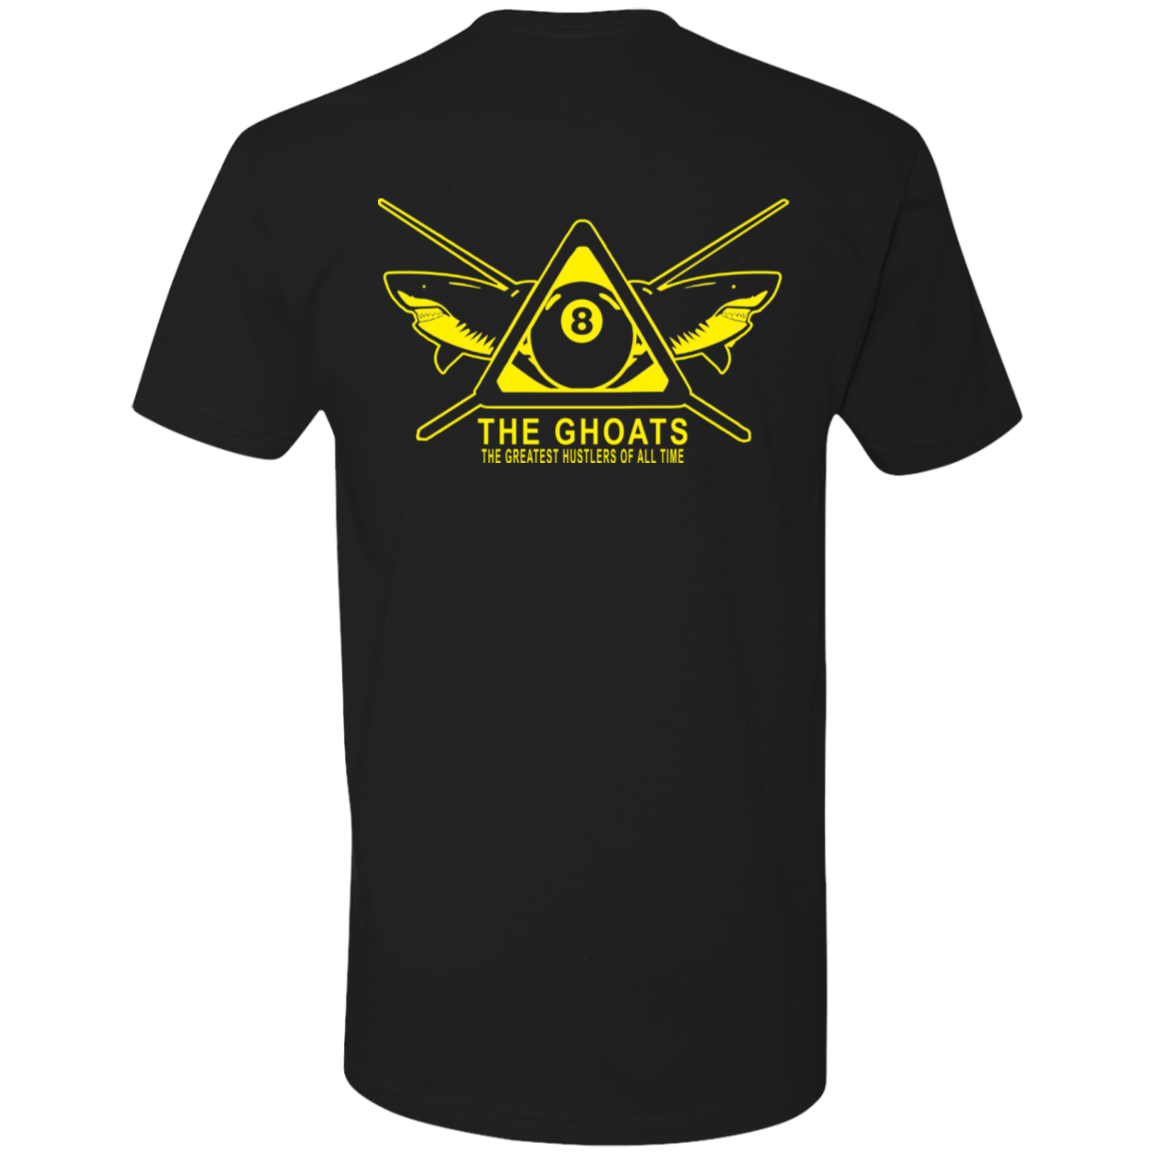 The GHOATS Custom Design #35. Beware of Sharks. Shoot at Your Own Risk. Next Level Ultra Soft Fitted T-Shirt